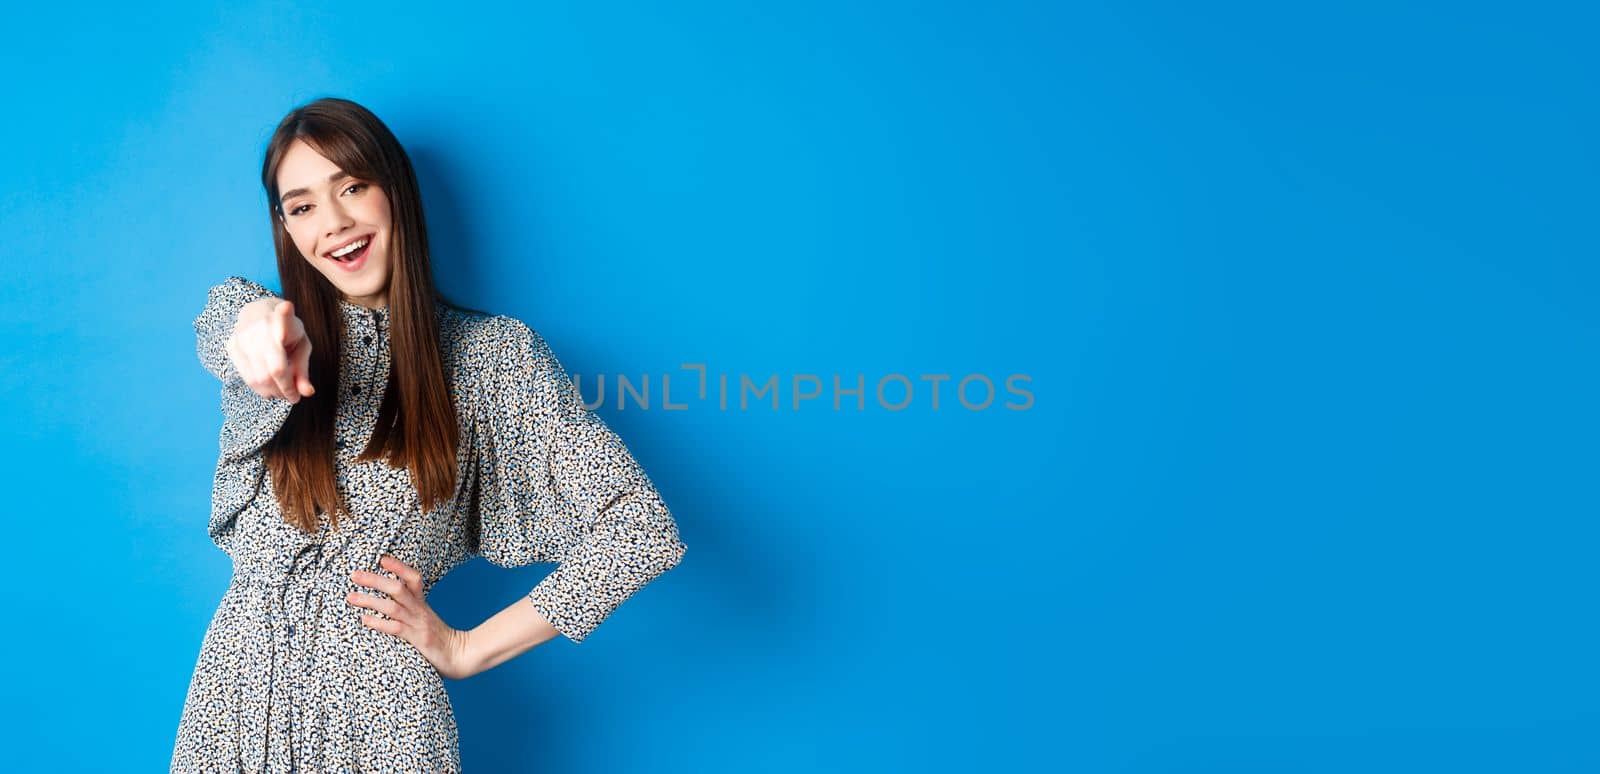 Motivated and excited young woman pointing finger at camera and smiling, congratulating you, praising or inviting, standing happy on blue background.